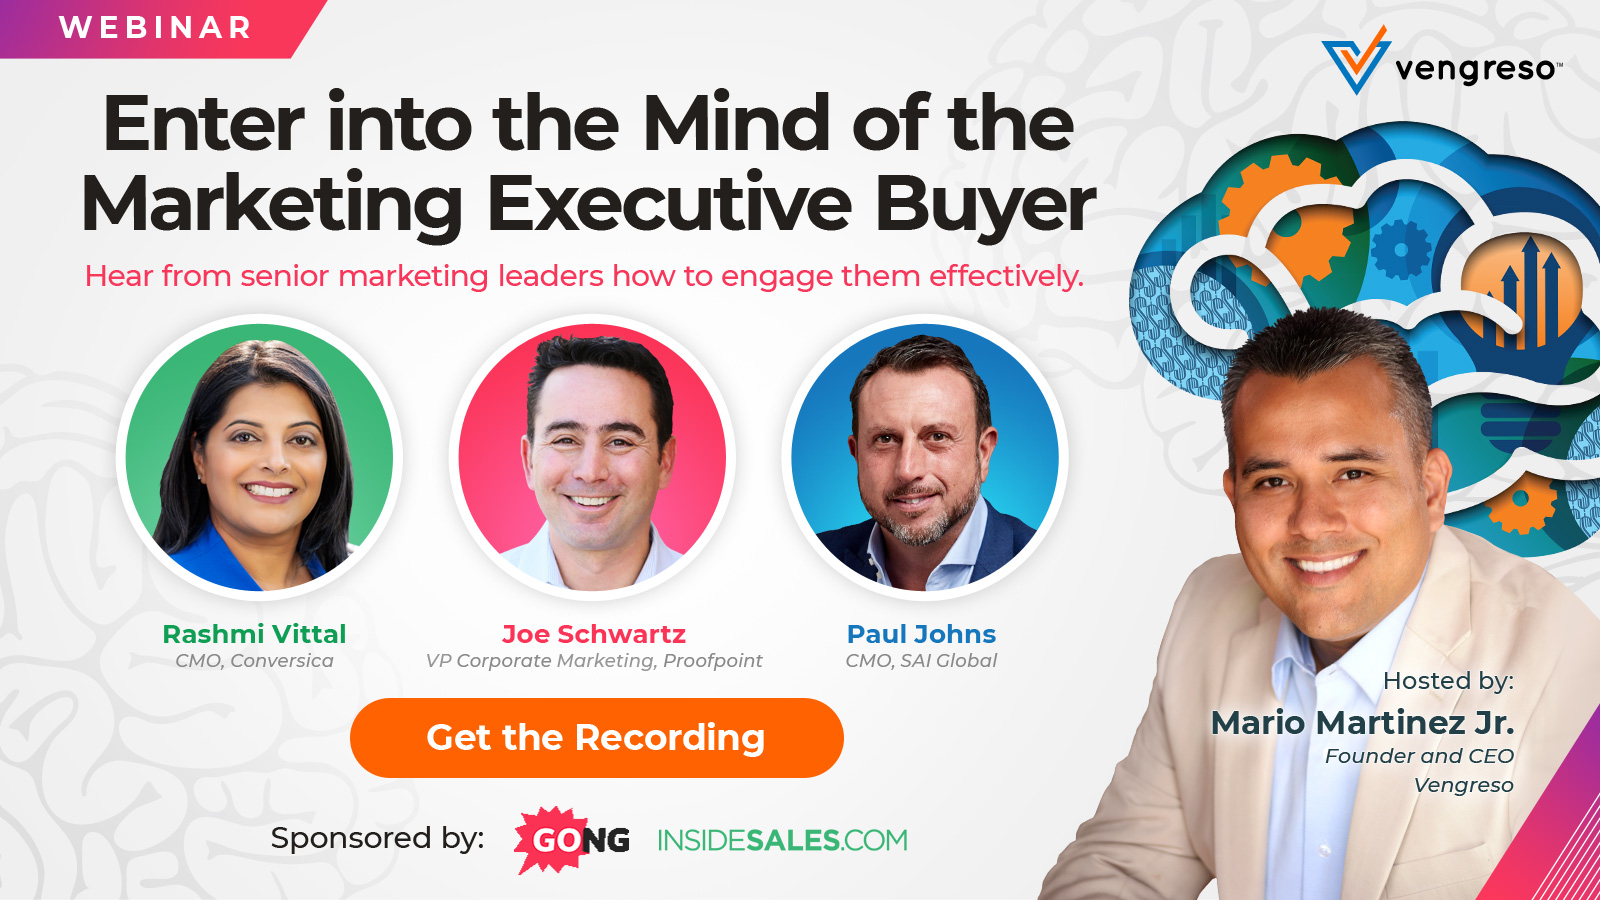 Enter into the Mind of the Marketing Executive Buyer